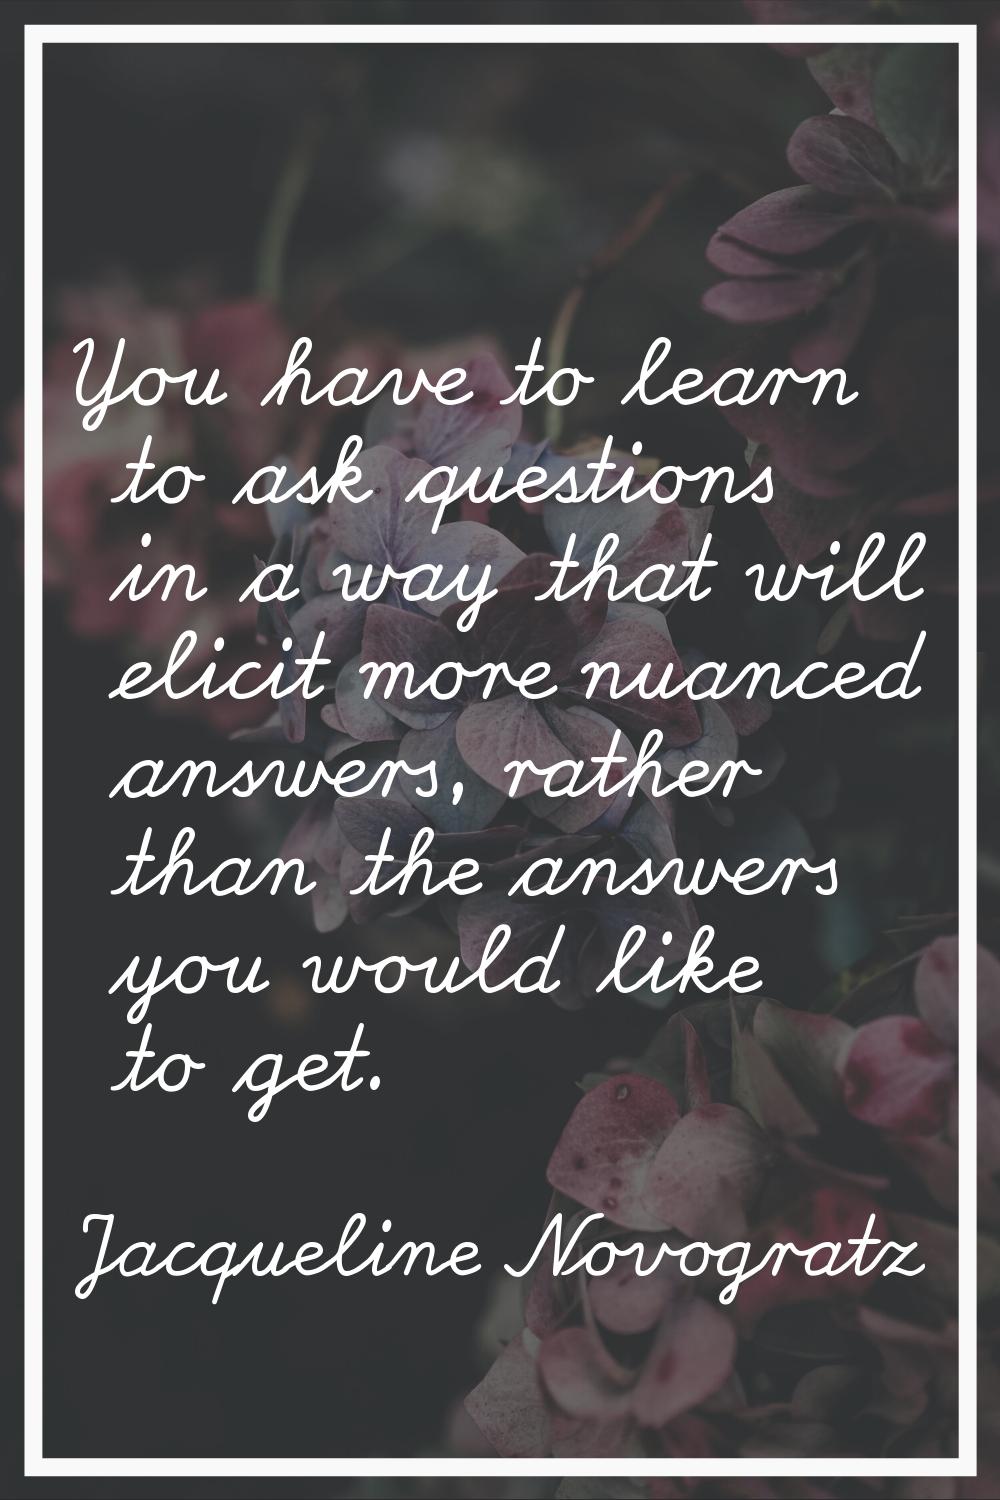 You have to learn to ask questions in a way that will elicit more nuanced answers, rather than the 